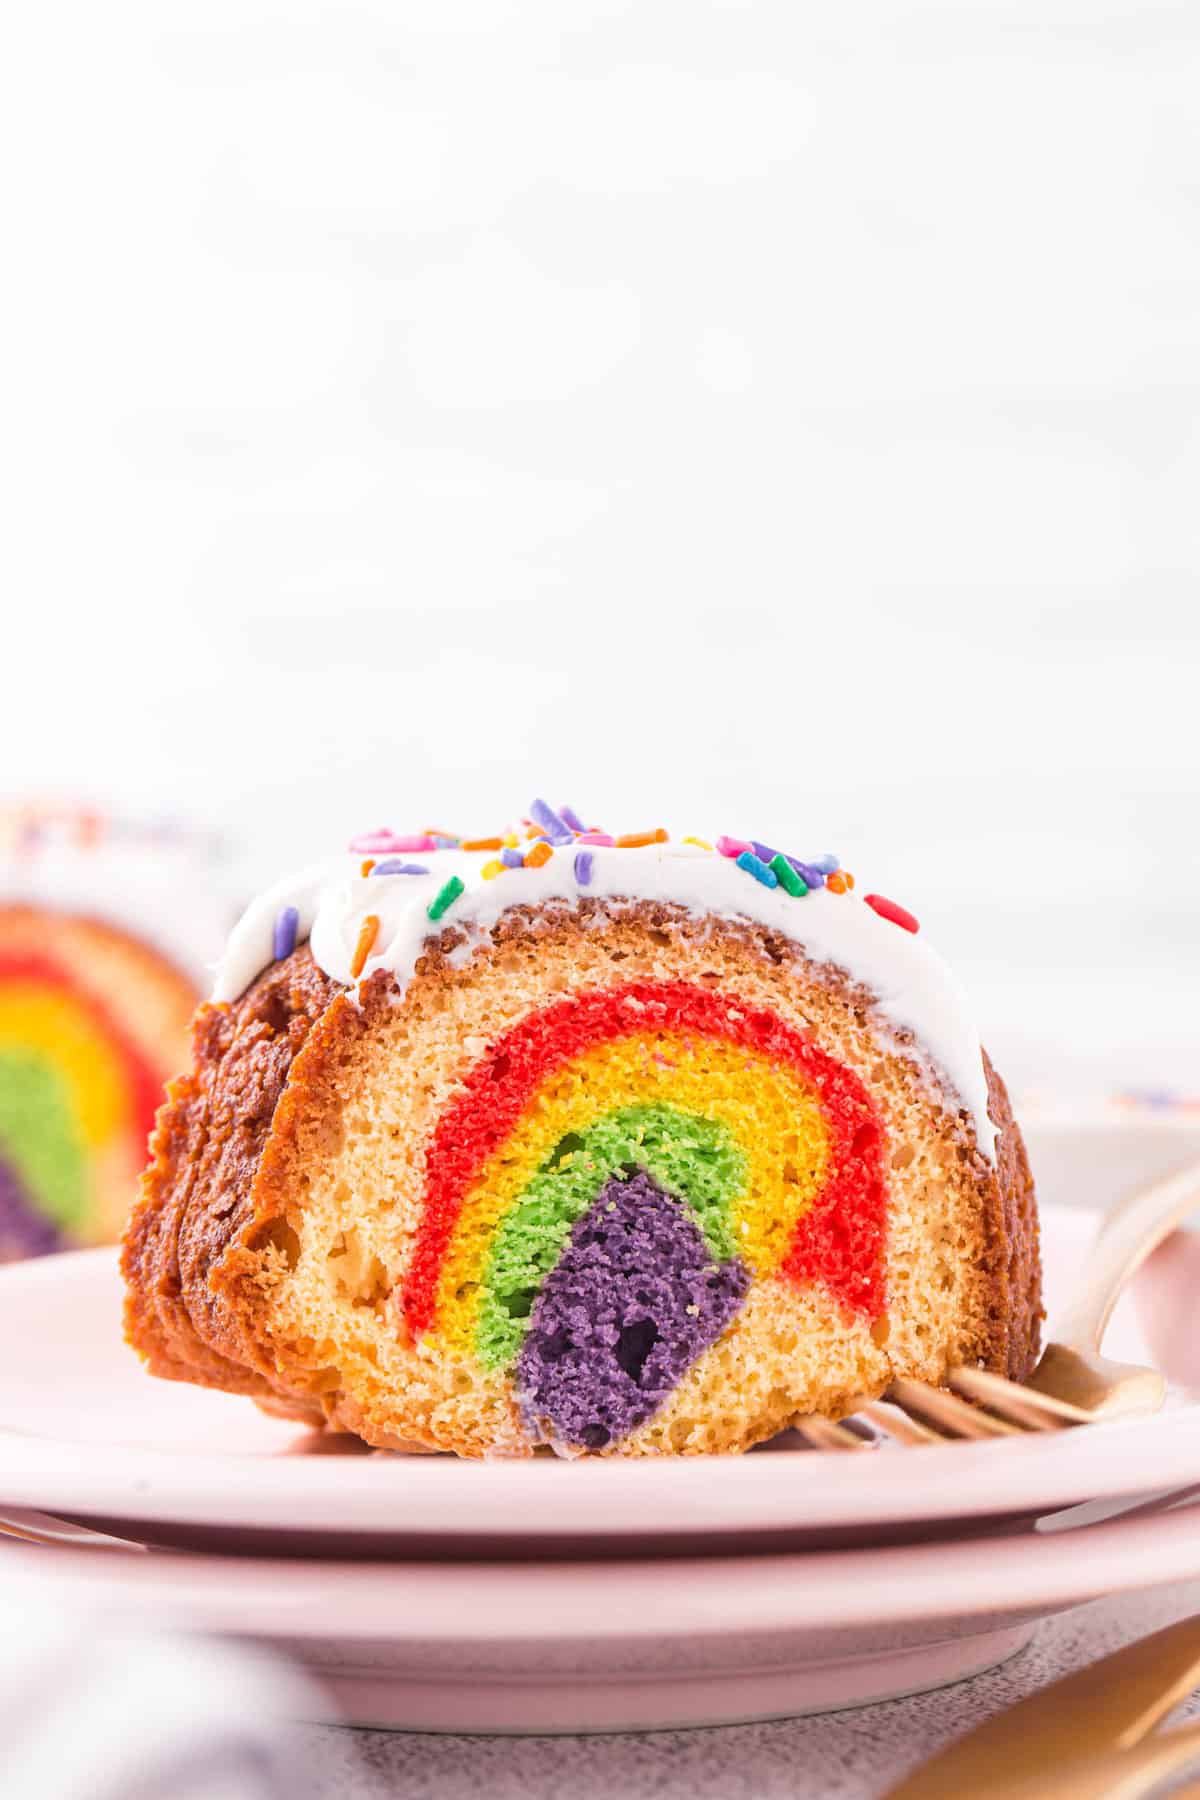 Chunk of bundt cake on a plate showing the inside of the cake with all the different colors.